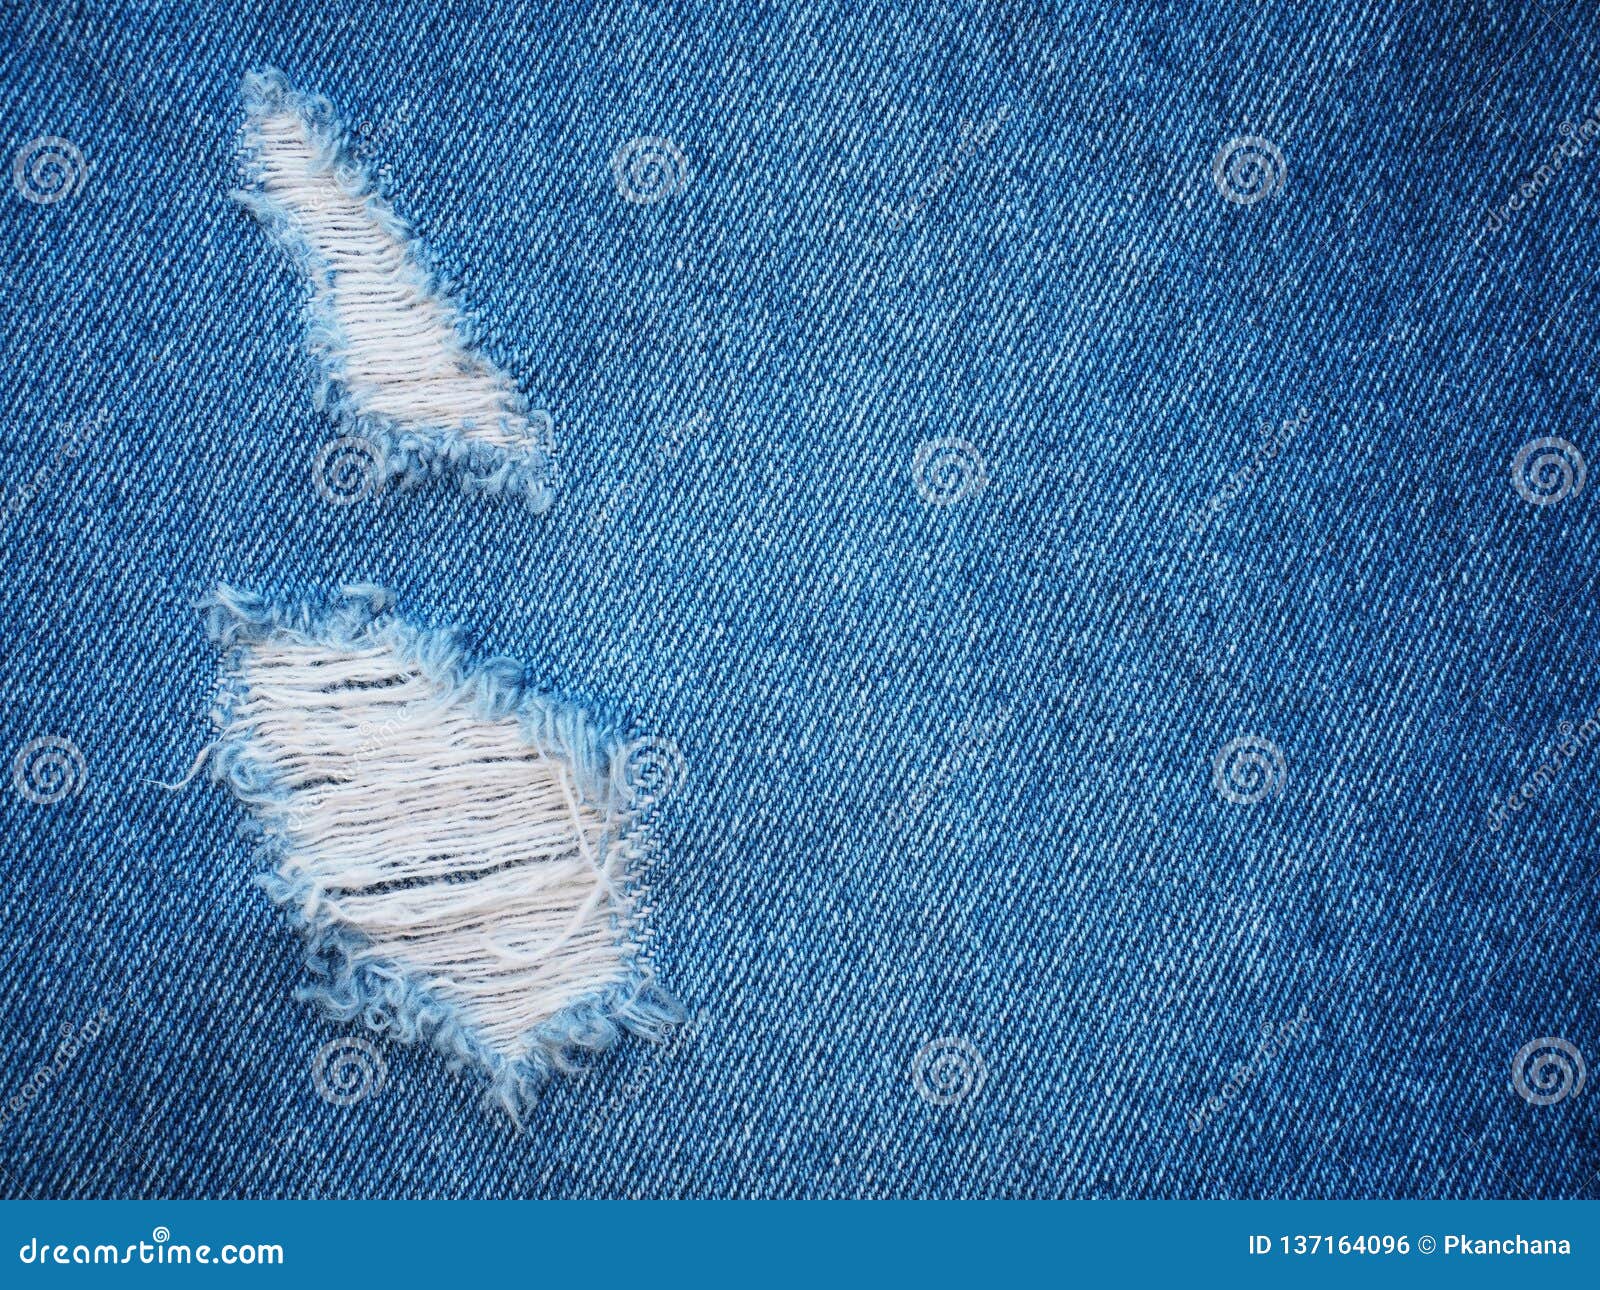 Ripped Torn Pattern of Light Blue Jeans Stock Photo - Image of denim ...